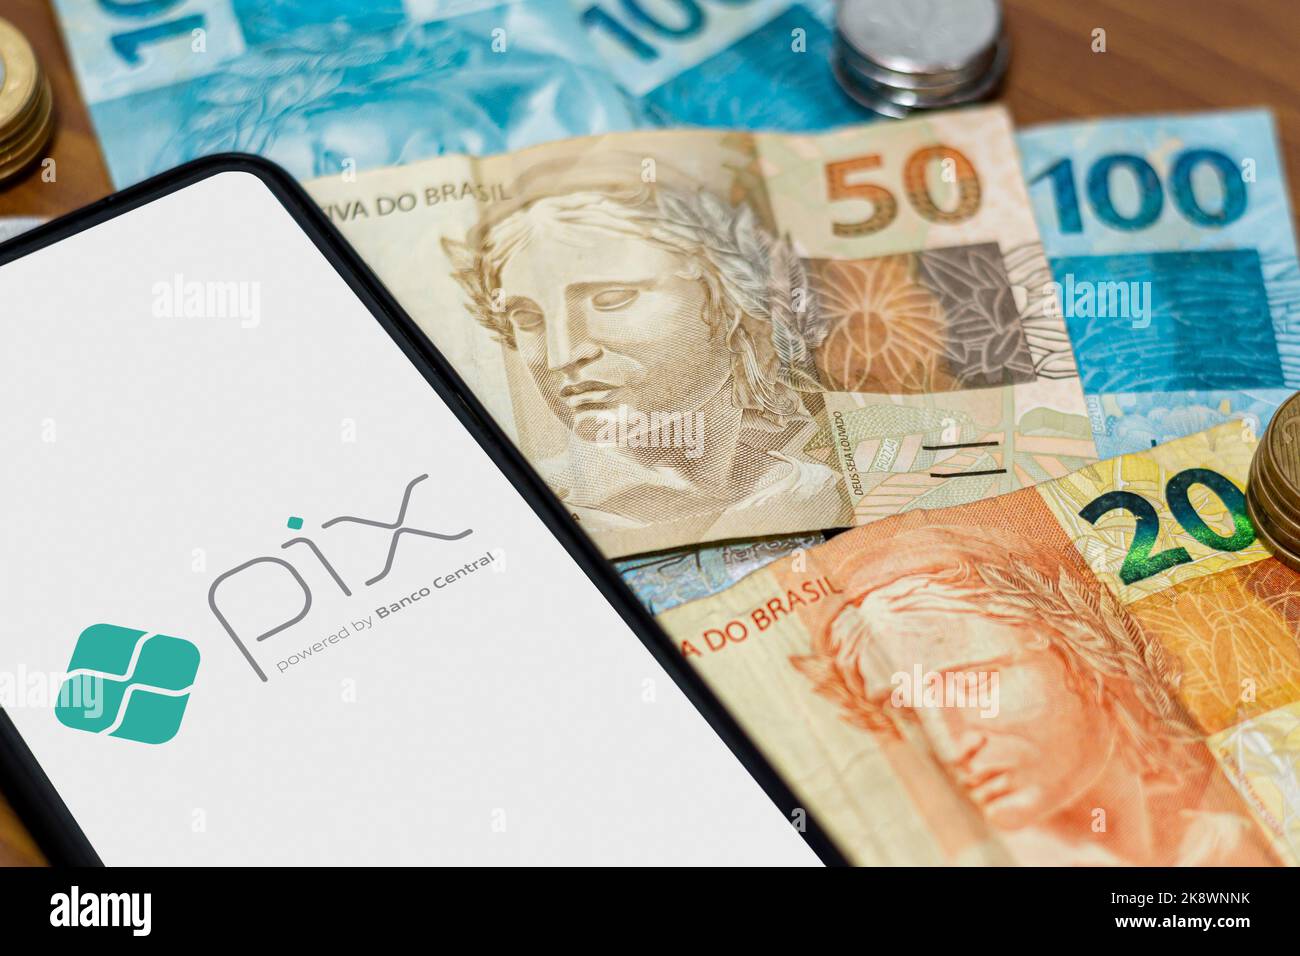 Sao Paulo, Brazil. MARCH 8, 2022: Pix logo on smartphone screen with multiple coins around. Pix is the new payment and transfer system of the Brazilia Stock Photo